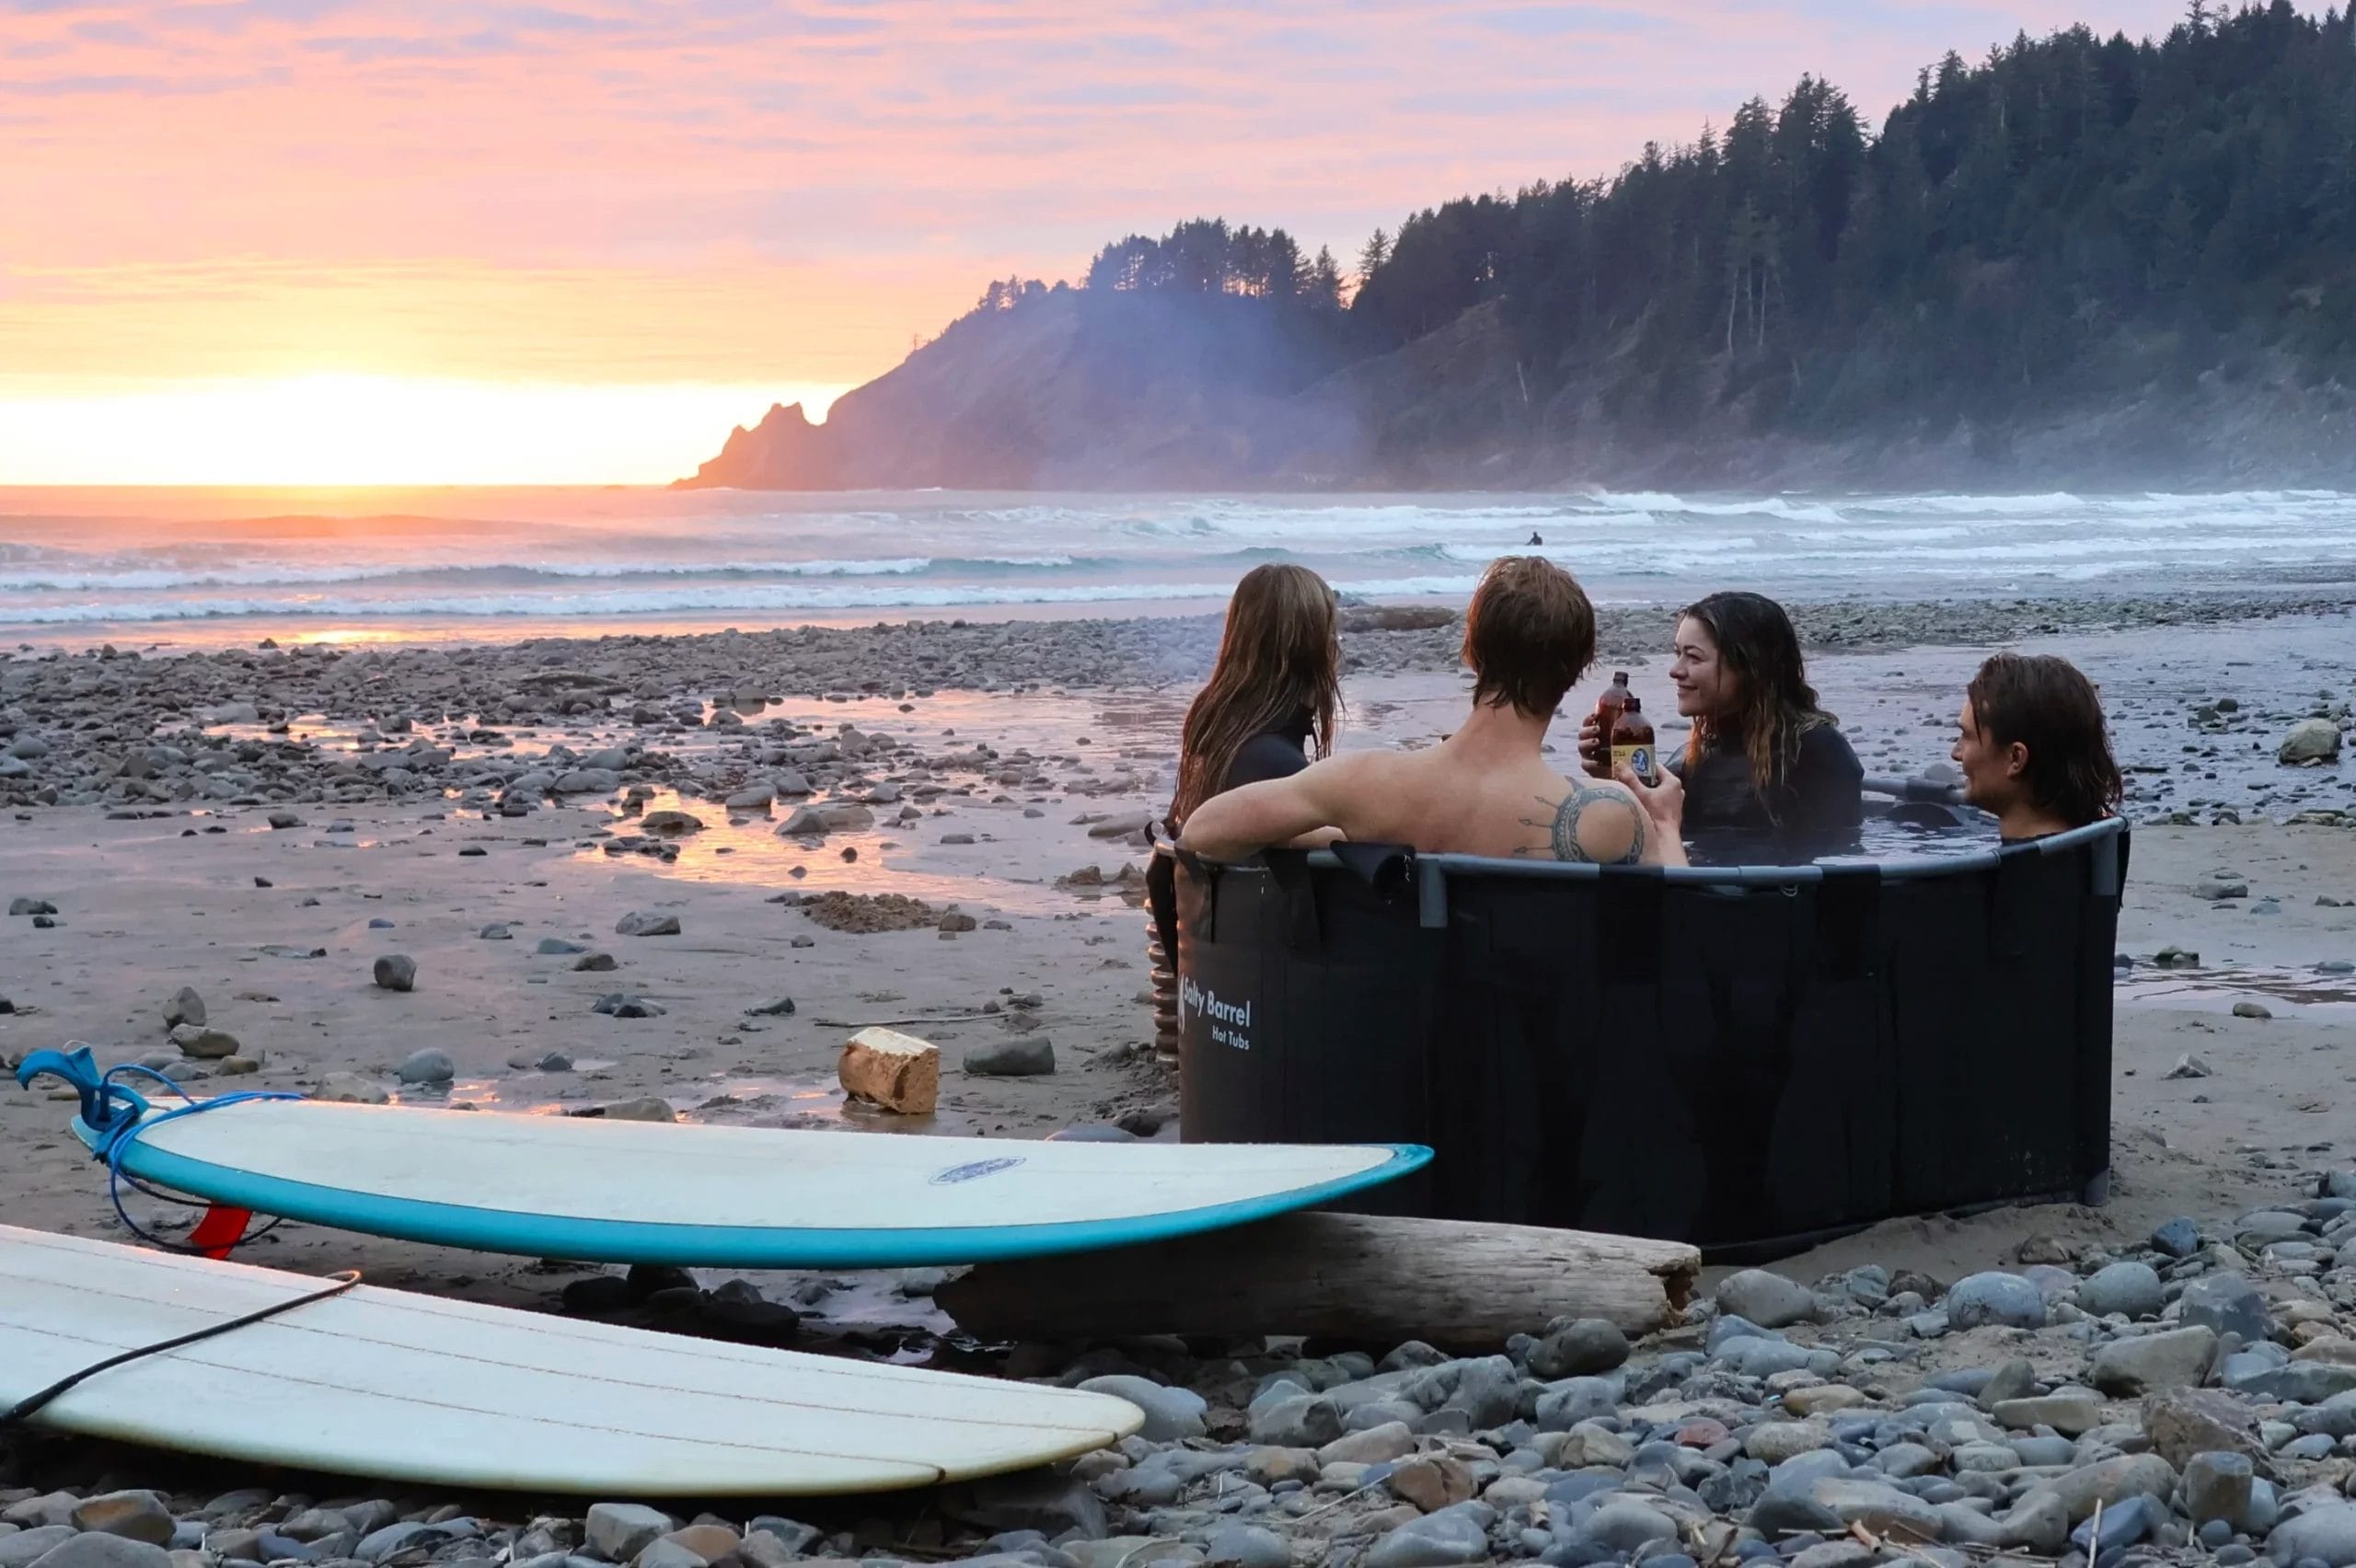 A Portable Wood Fired Hot Tub For The Outdoors - First Look